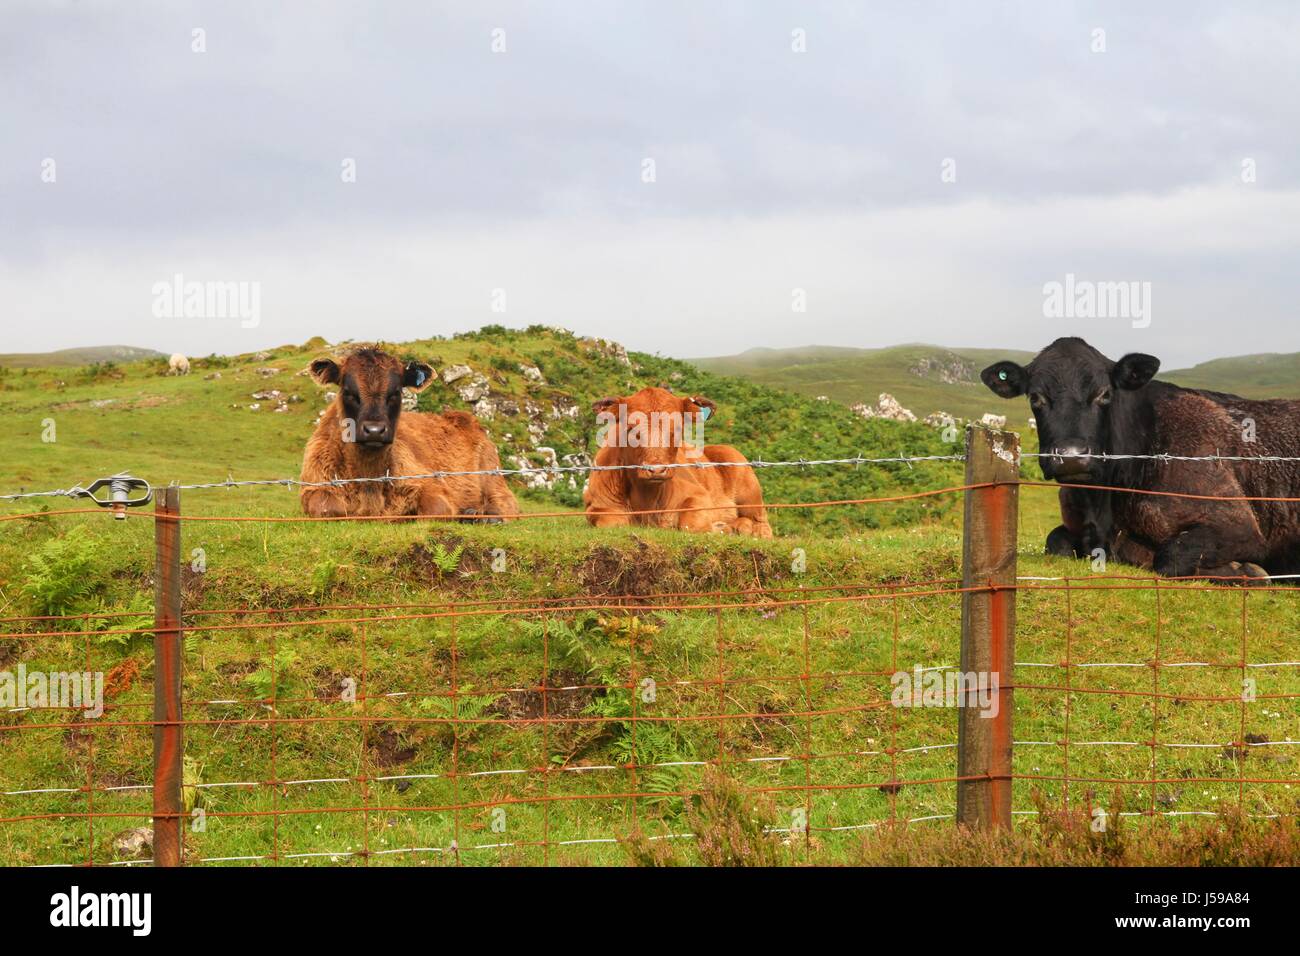 Cattle in scotland behind barbed wire Stock Photo